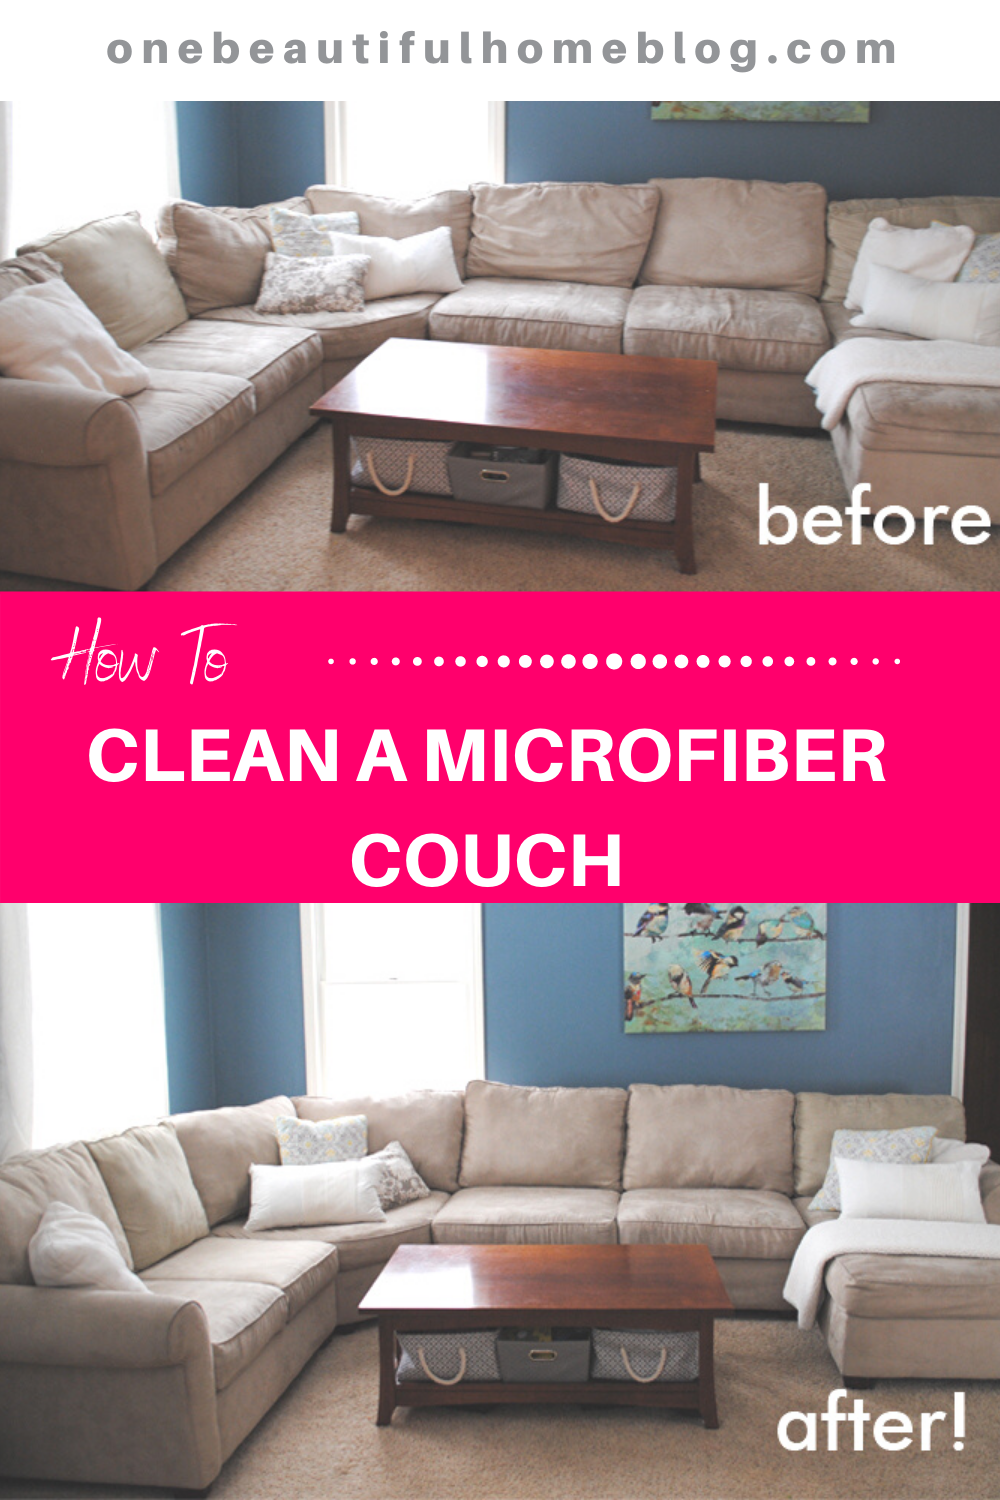 How to clean upholstery: Clean couches, cars and more